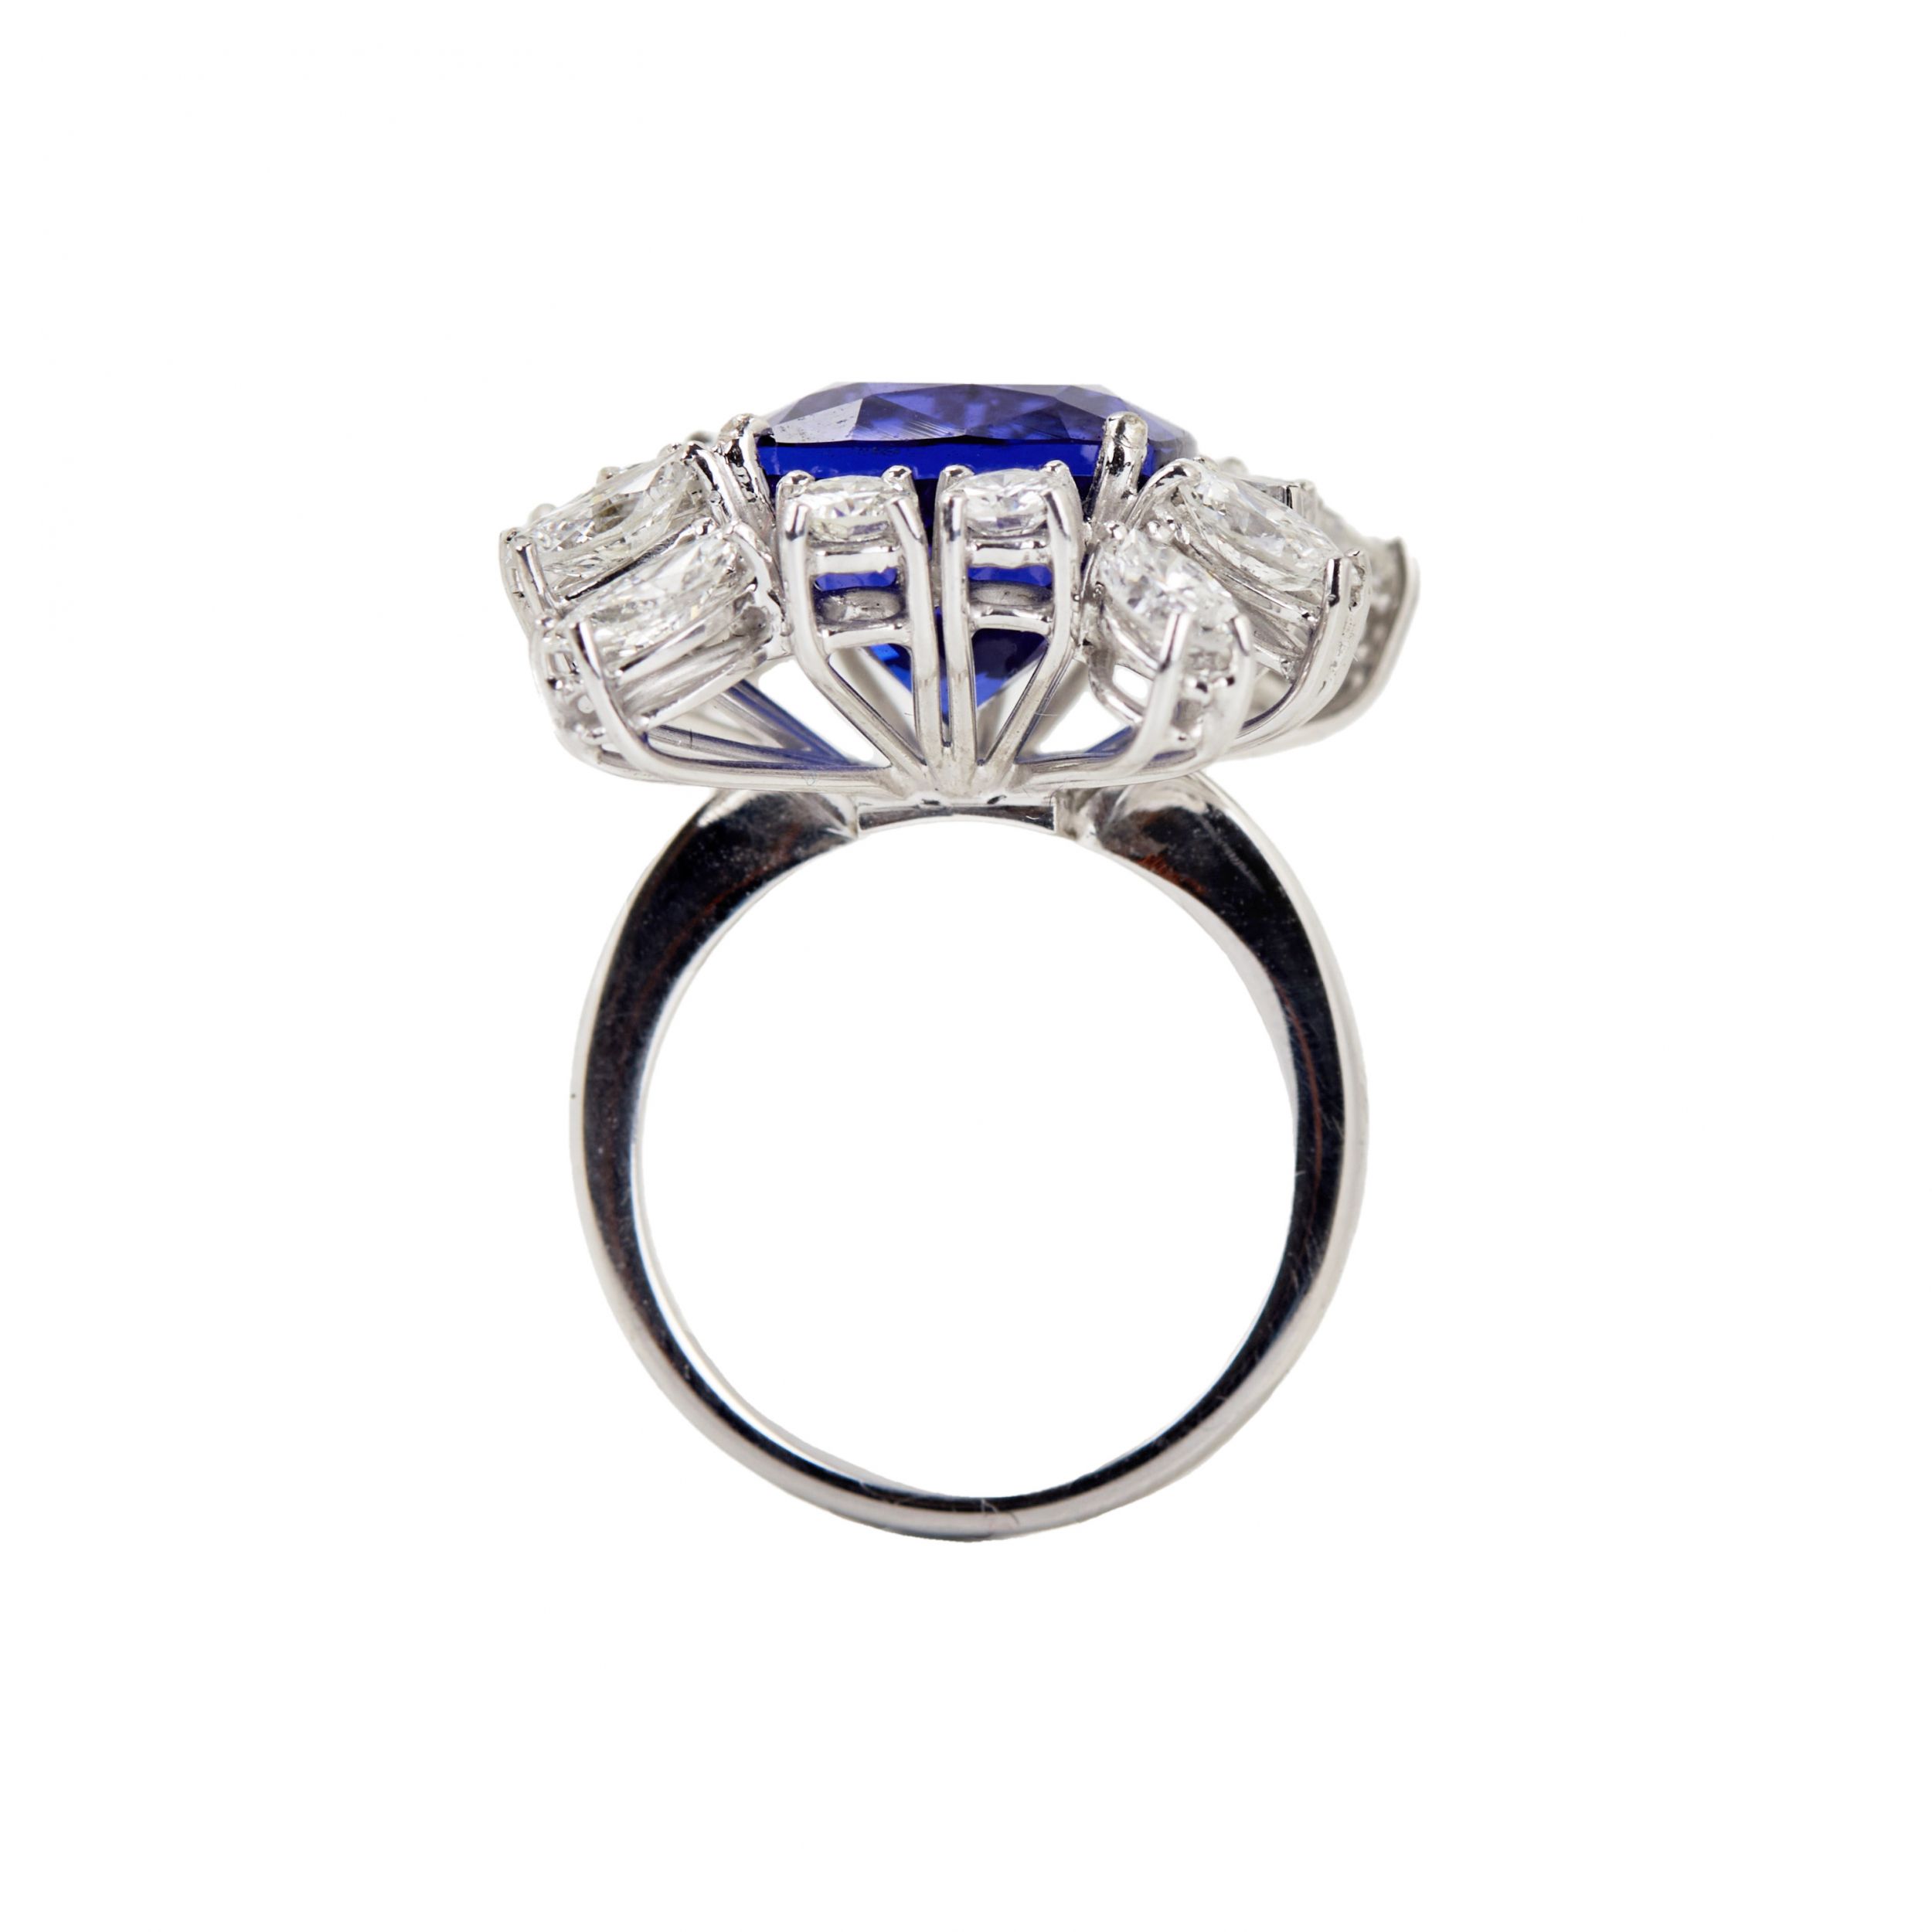 Gold ring with tanzanite and diamonds. - Image 5 of 8